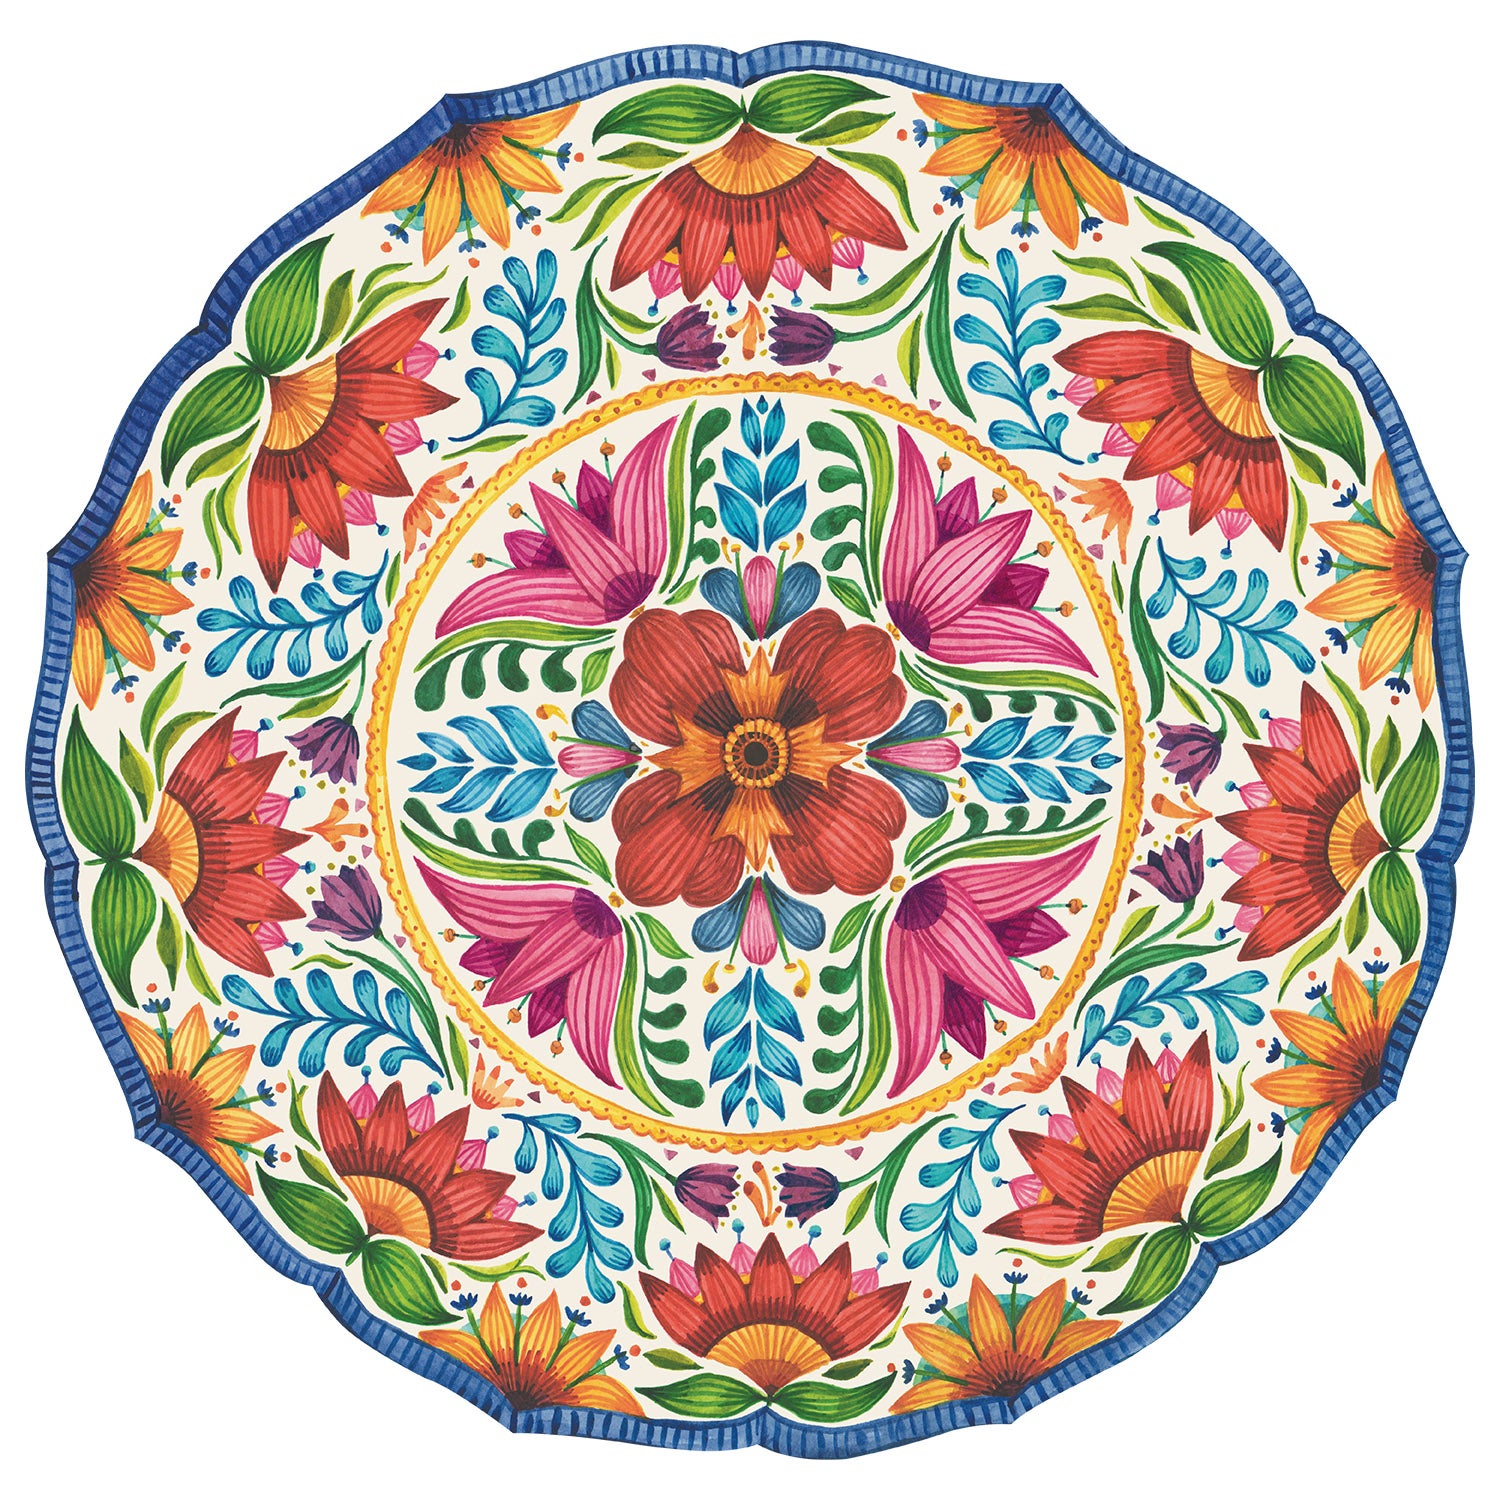 A vibrant Die-cut Fiesta Floral Placemat adorned with colorful flowers by Hester &amp; Cook.